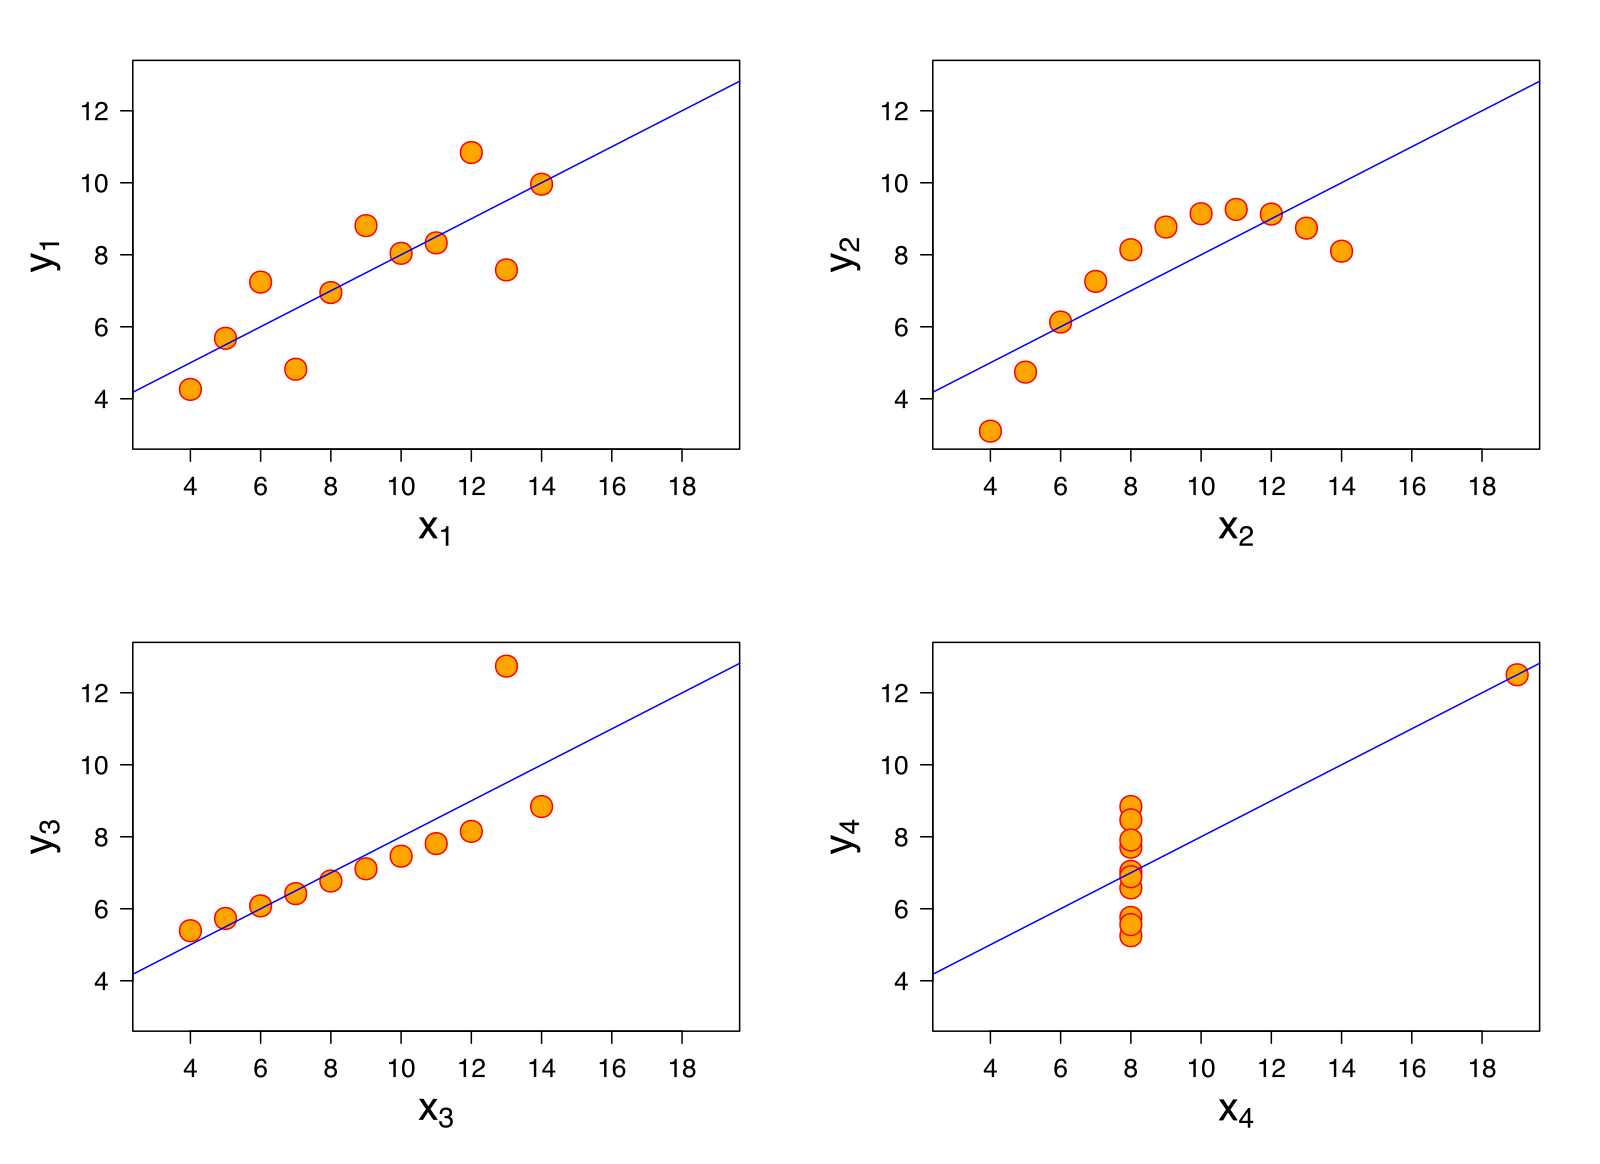 Four datasets with the same correlation of 0.816. (Anscombe, Francis J., 1973, Graphs in statistical analysis. American Statistician, 27, 17–21. Source: Wikipedia, User:Schutz (CC BY-SA 3.0) [https://creativecommons.org/licenses/by-sa/3.0/legalcode]).